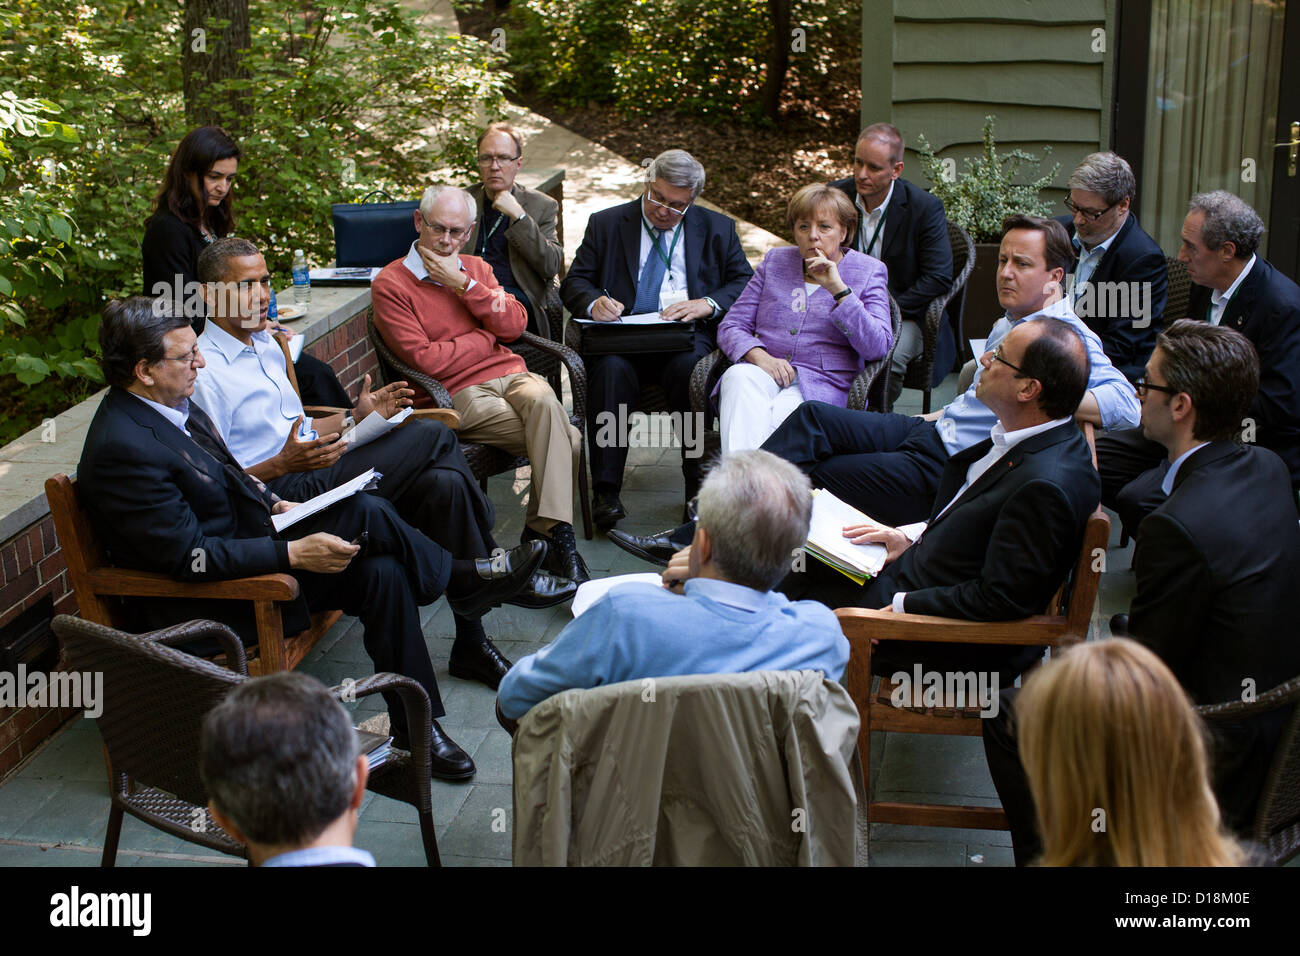 President Barack Obama meets with Eurozone leaders on the Laurel Cabin patio during the G8 Summit at Camp David, Md., May 19, Stock Photo